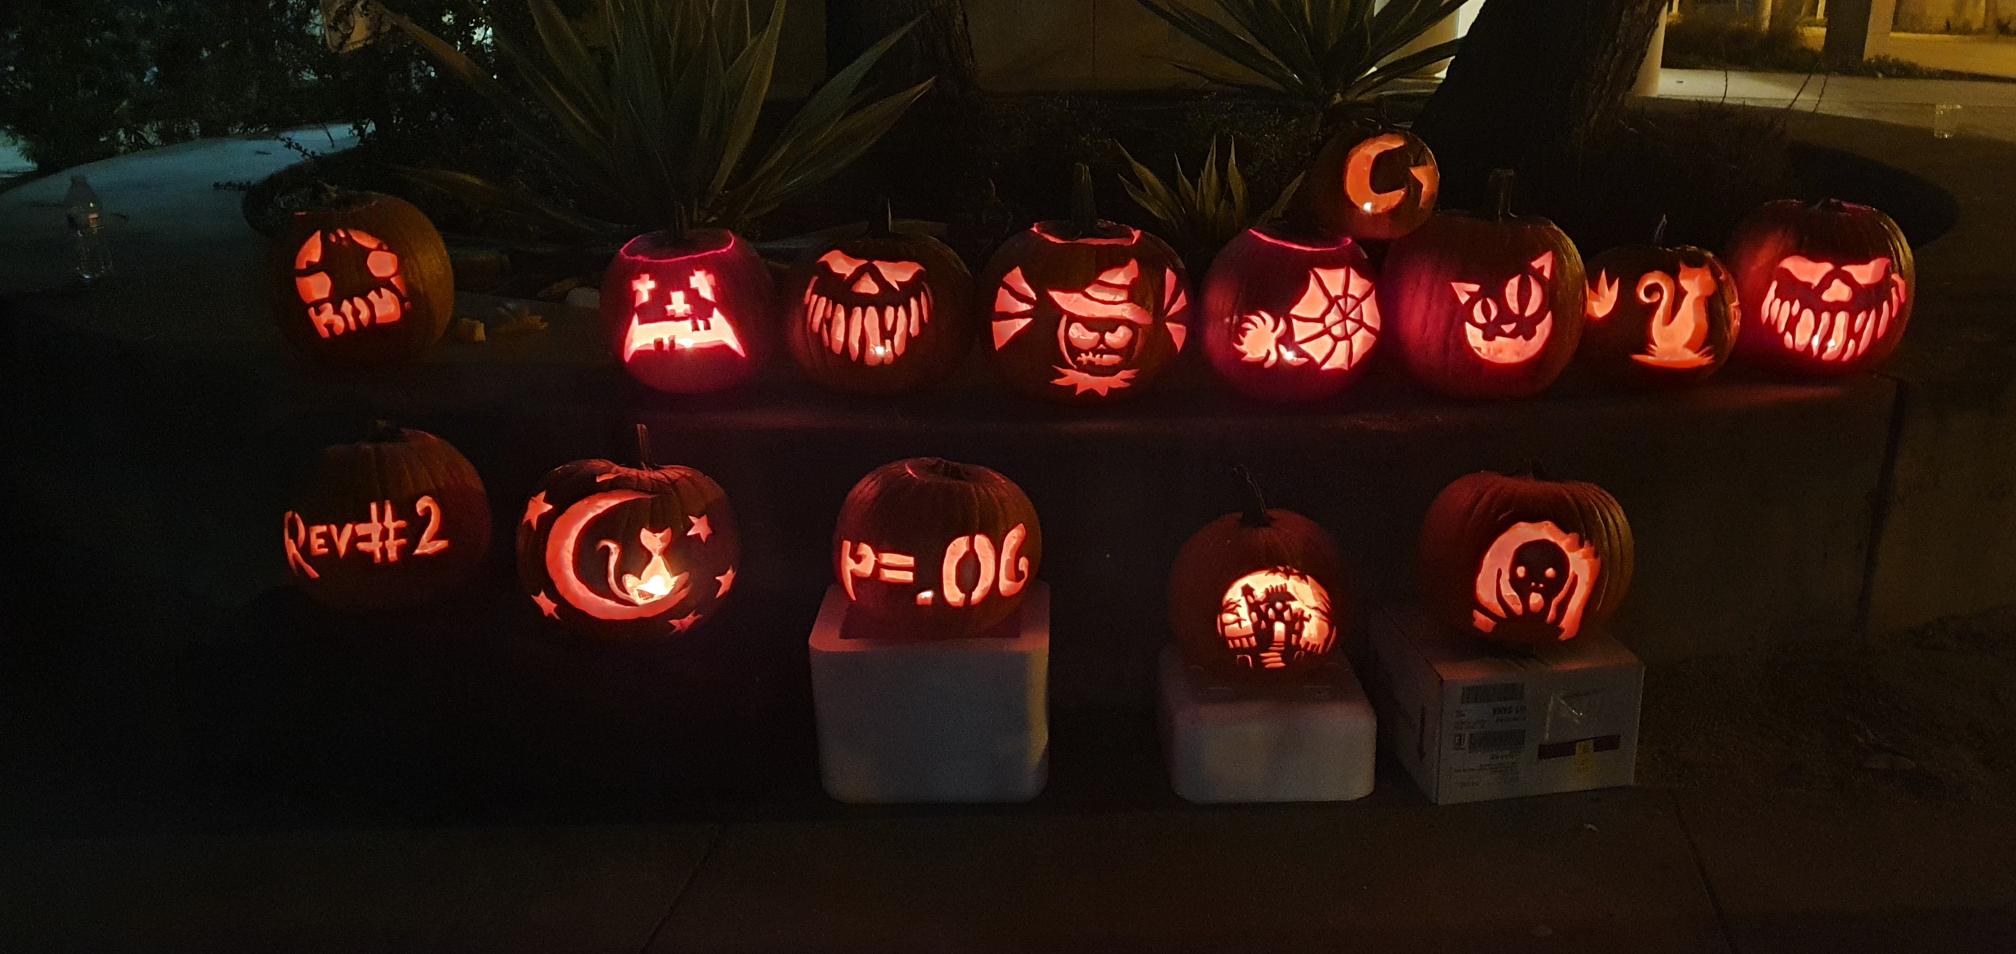 Pumpkin carving for Halloween with two contributions from Tzaridis*